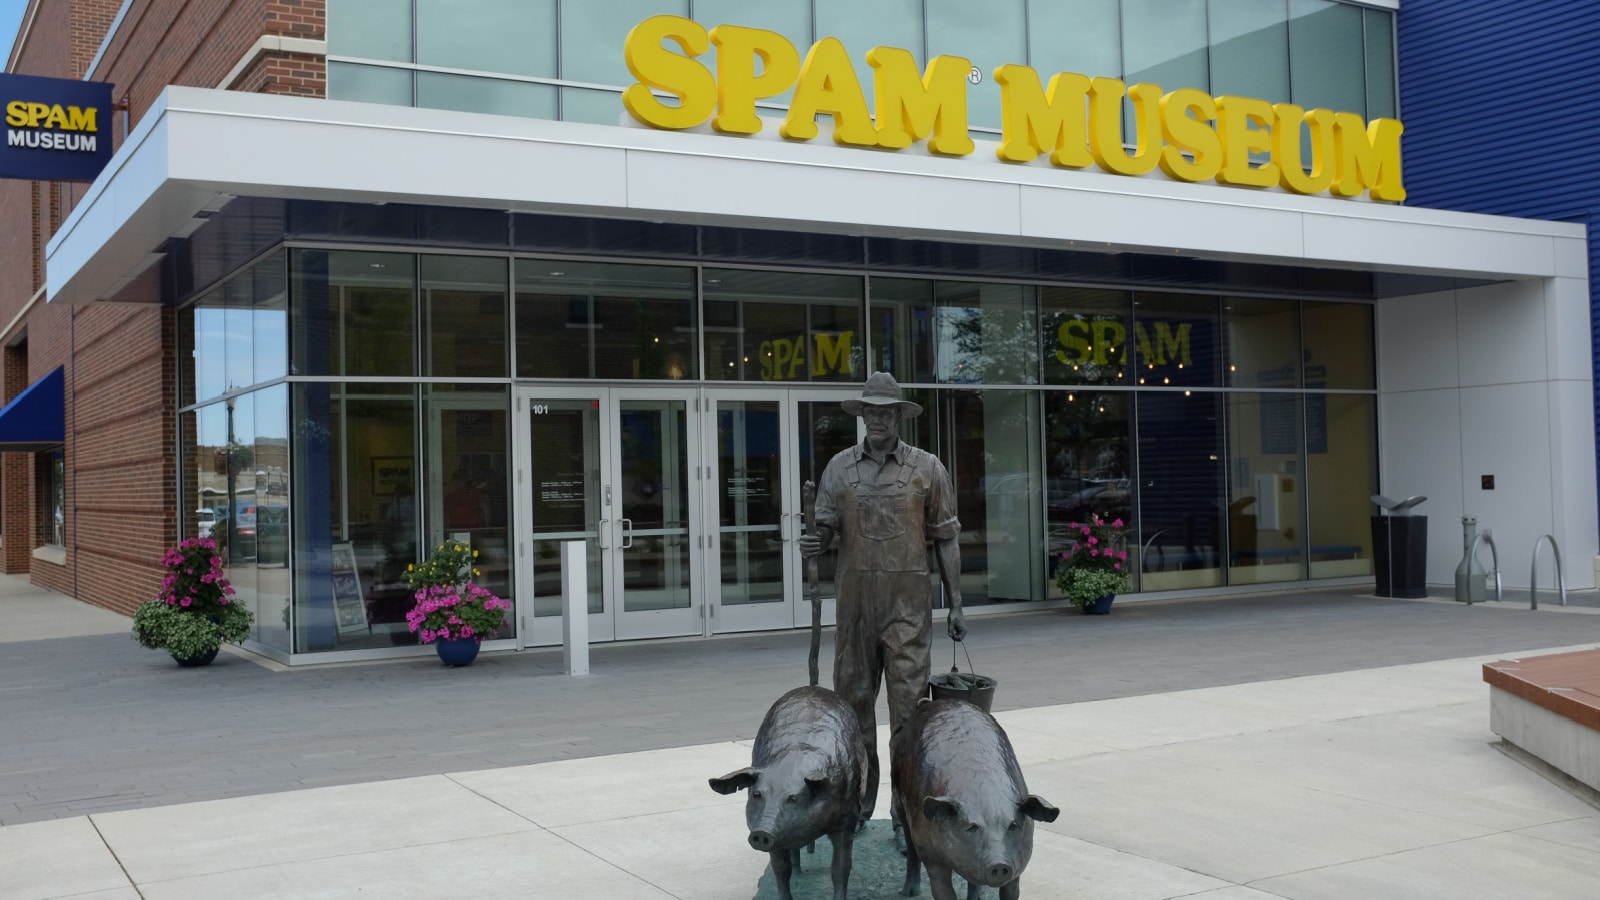 AUSTIN, MINNESOTA - JUNE 21, 2017: Statue at the Spam Museum. The 16,000 square foot space is dedicated to Spam, the canned precooked meat product made by the Hormel Foods Corporation.